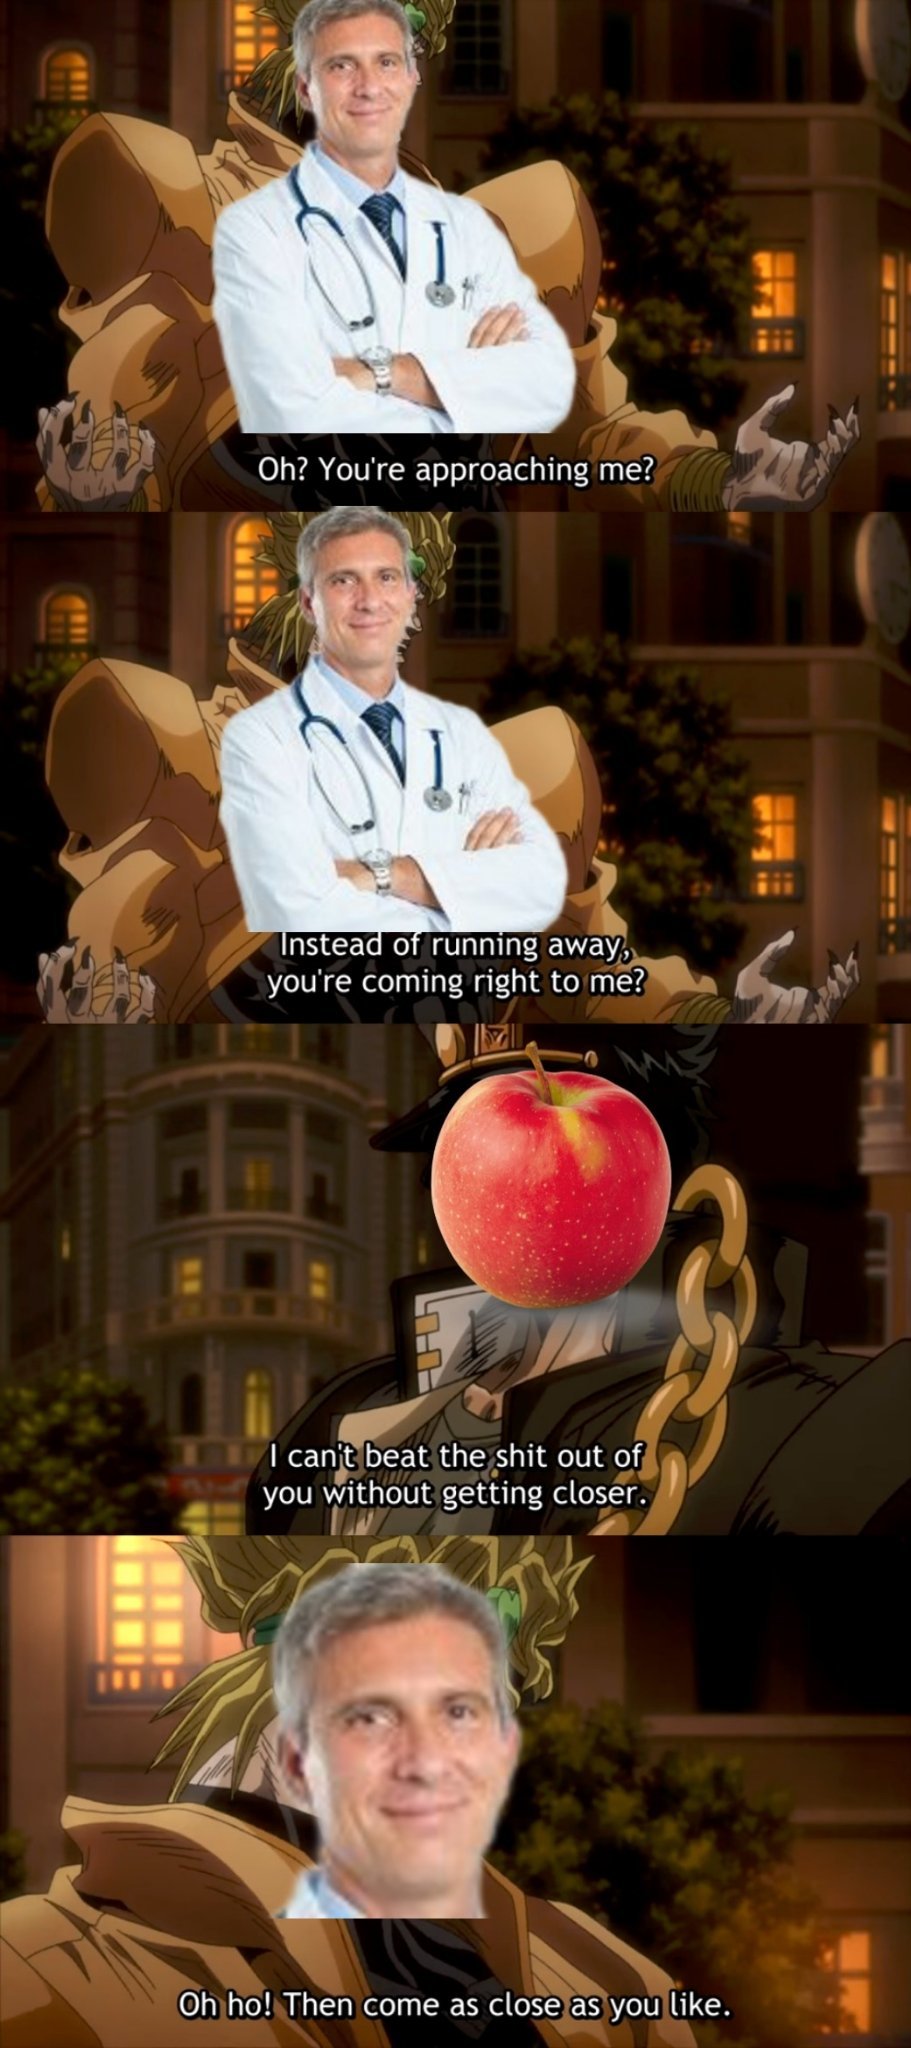 Top 10 anime battles: Apple vs. Doctor. Coming to theaters January 2022 - meme